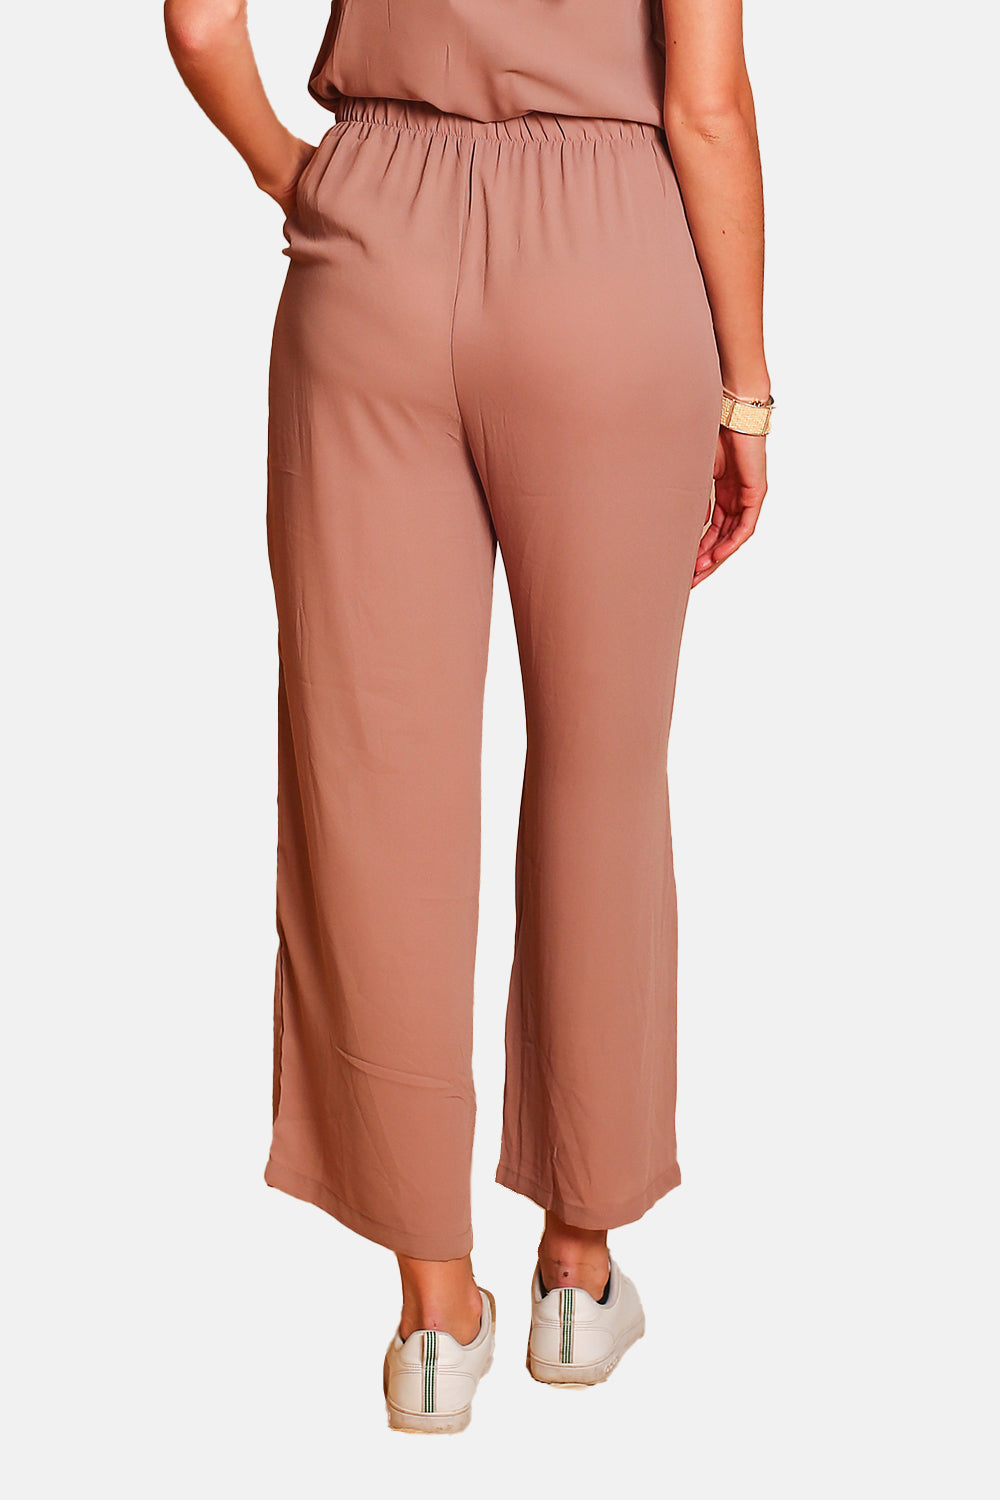 Top with thin straps and Wide satin pants